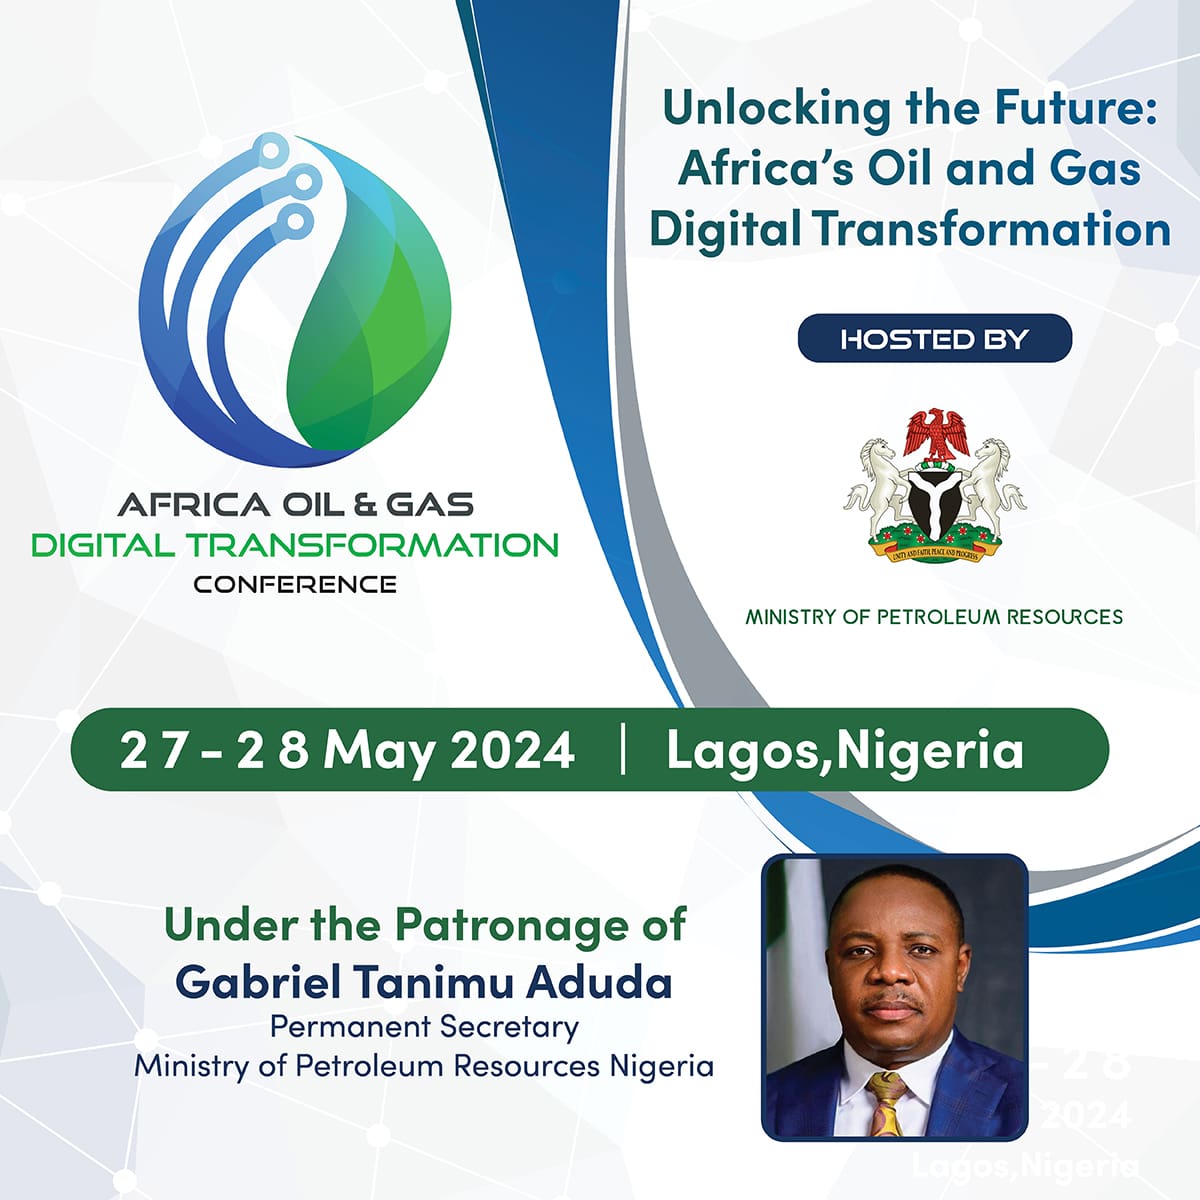 Africa Oil and Gas Digital Transformation Conference